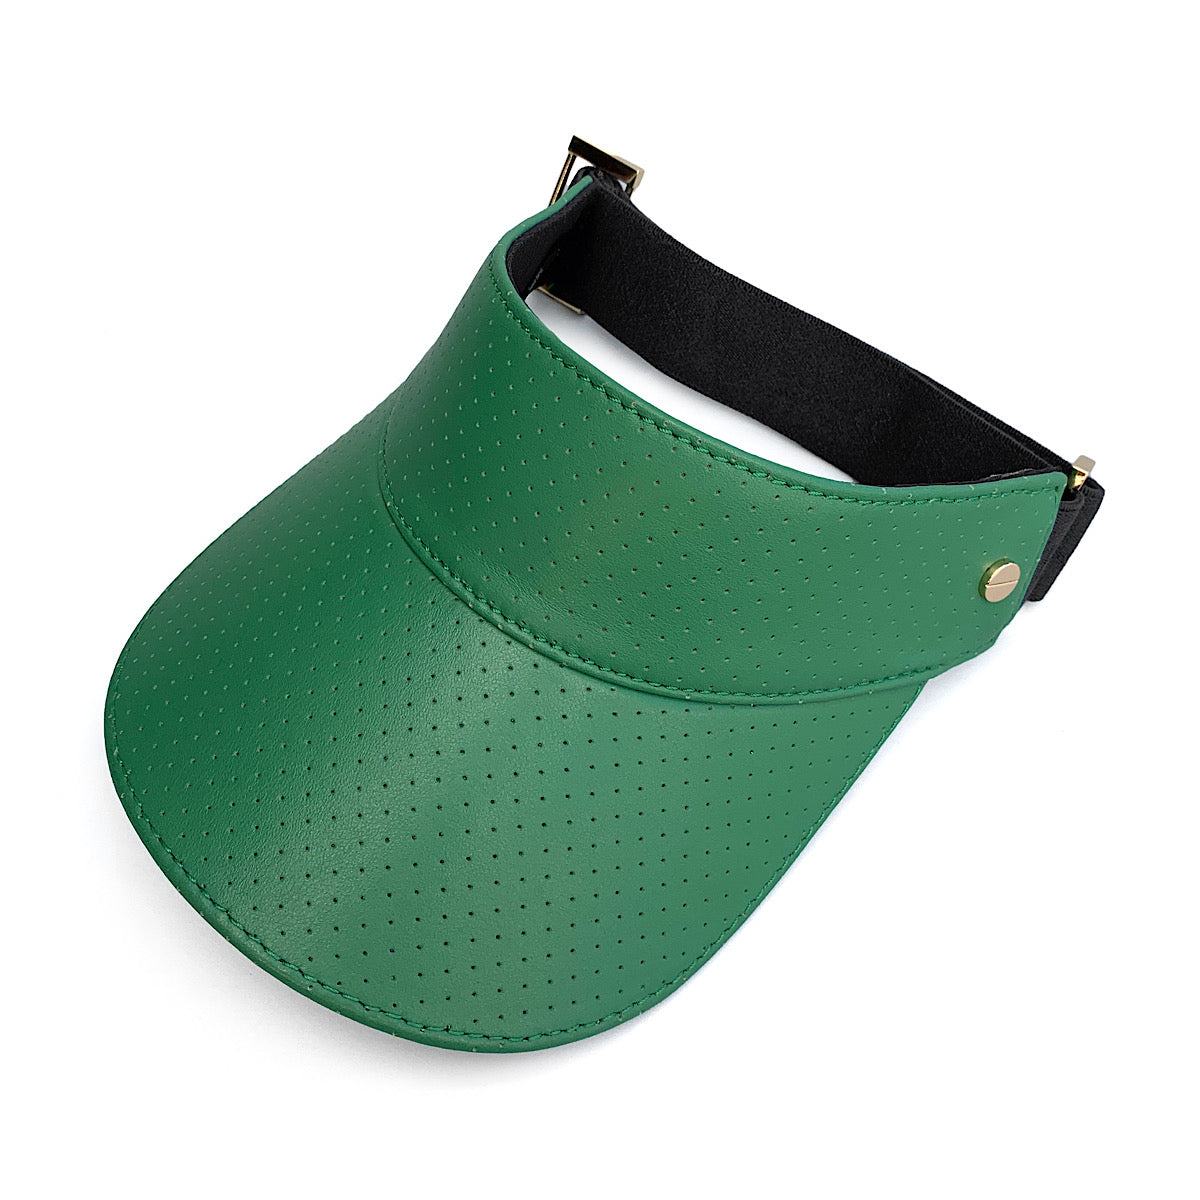 The Visor - Court Green Leather/Navy Trim & Gold